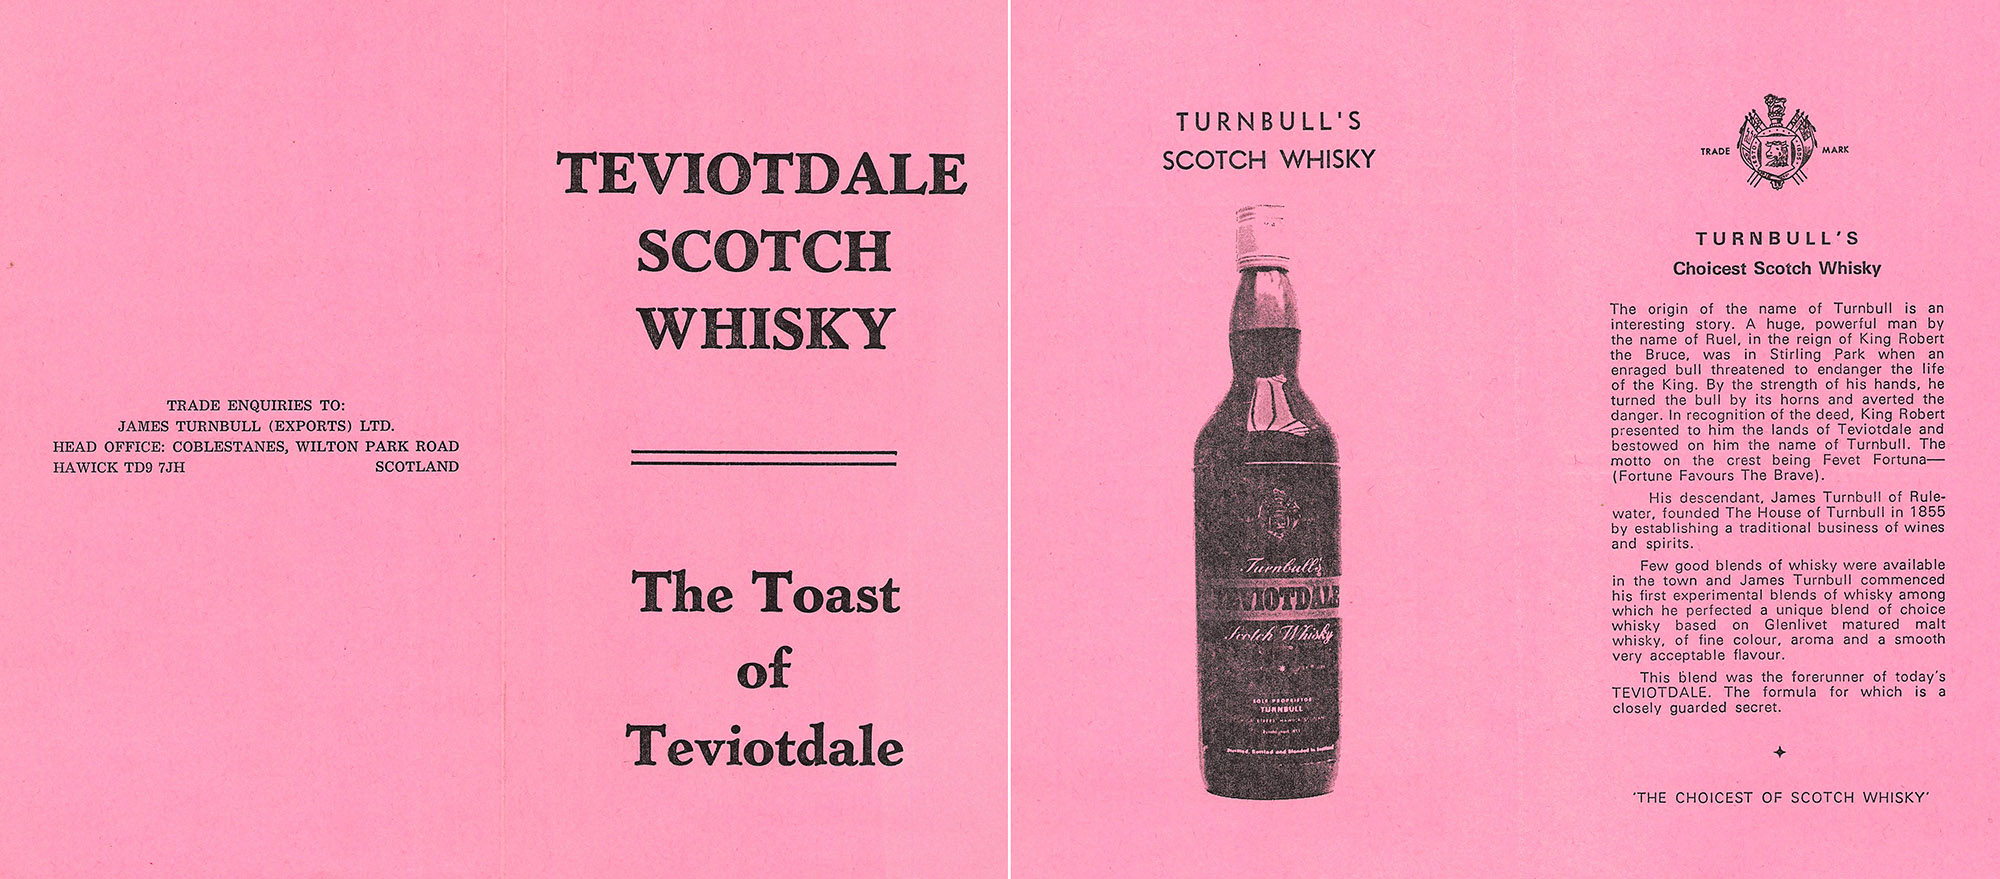 The Toast of Teviotdale Advertisement